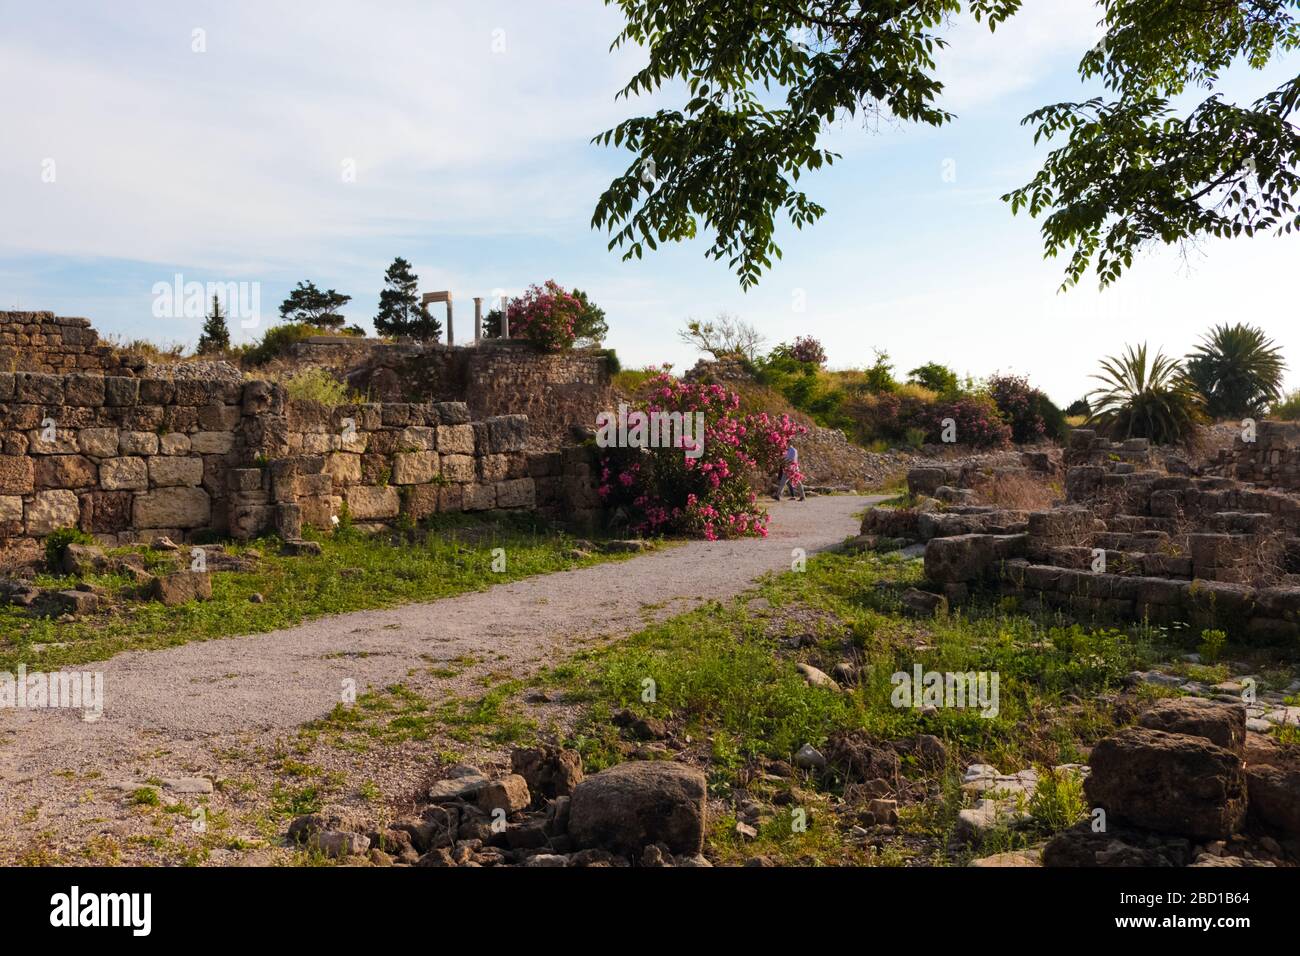 Byblos, Lebanon - May 12, 2017: Archaeological ruins of Roman built structures at Byblos, Lebanon. Stock Photo